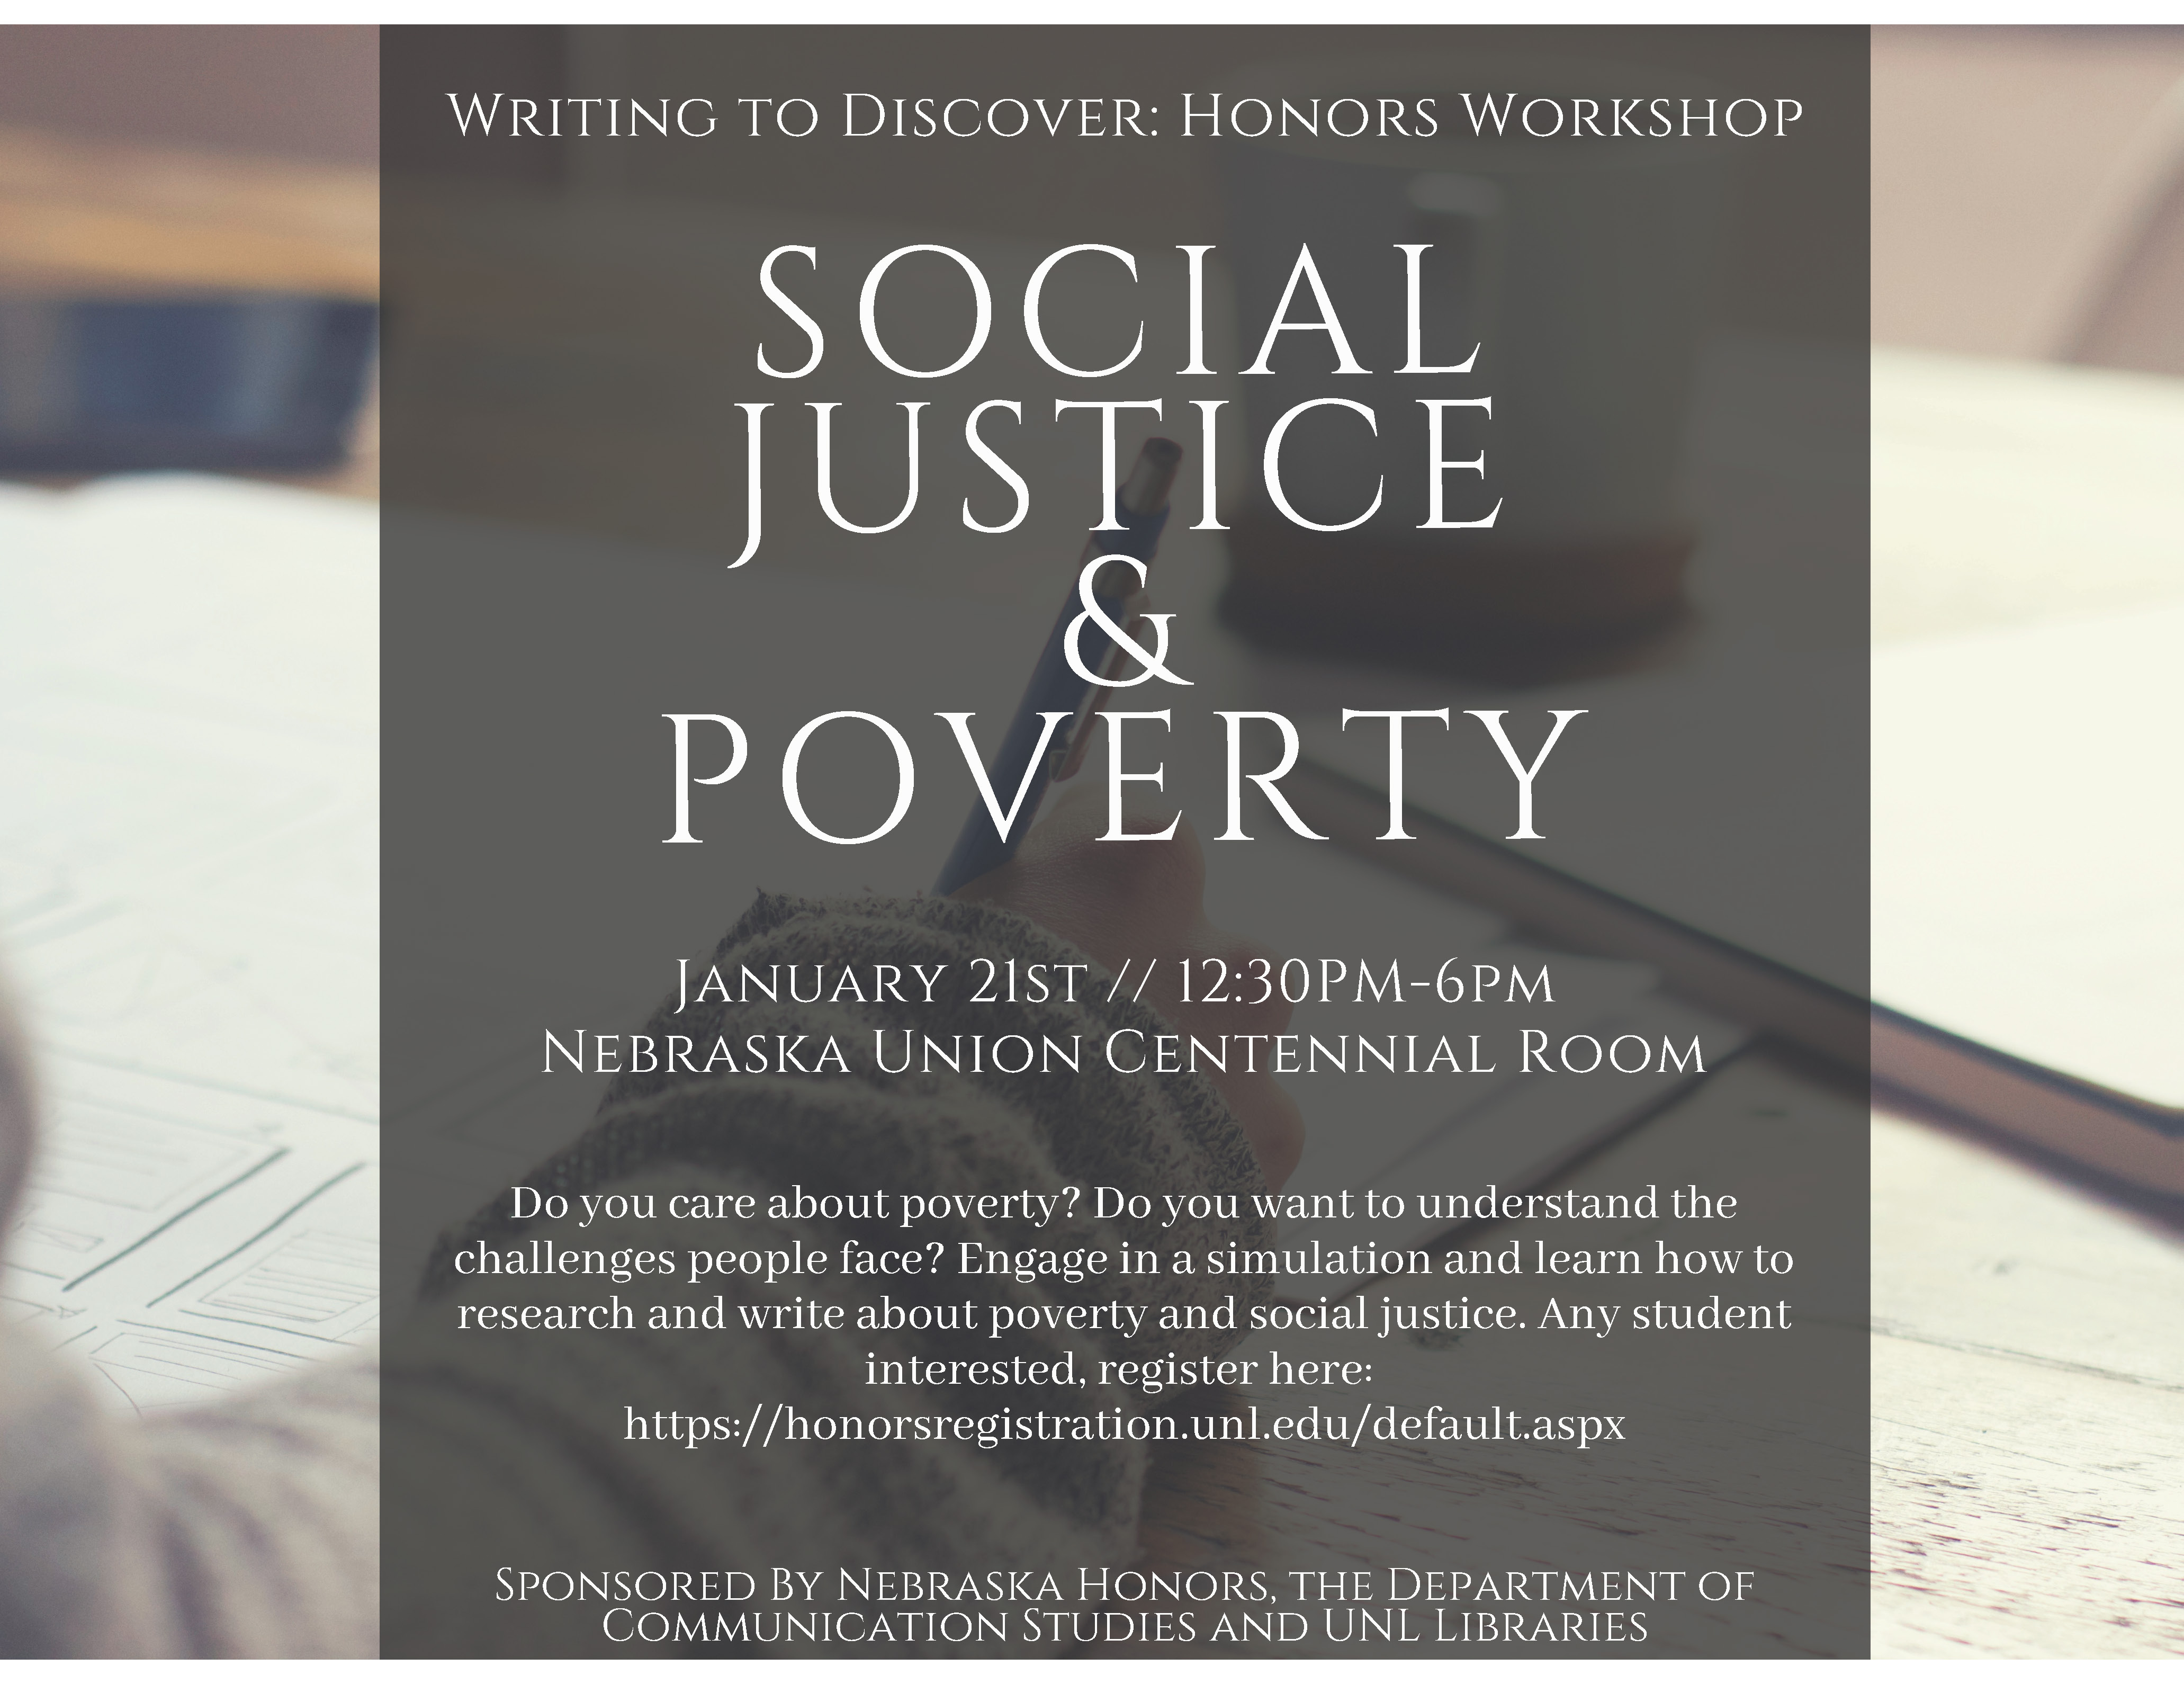 Social Justice & Poverty